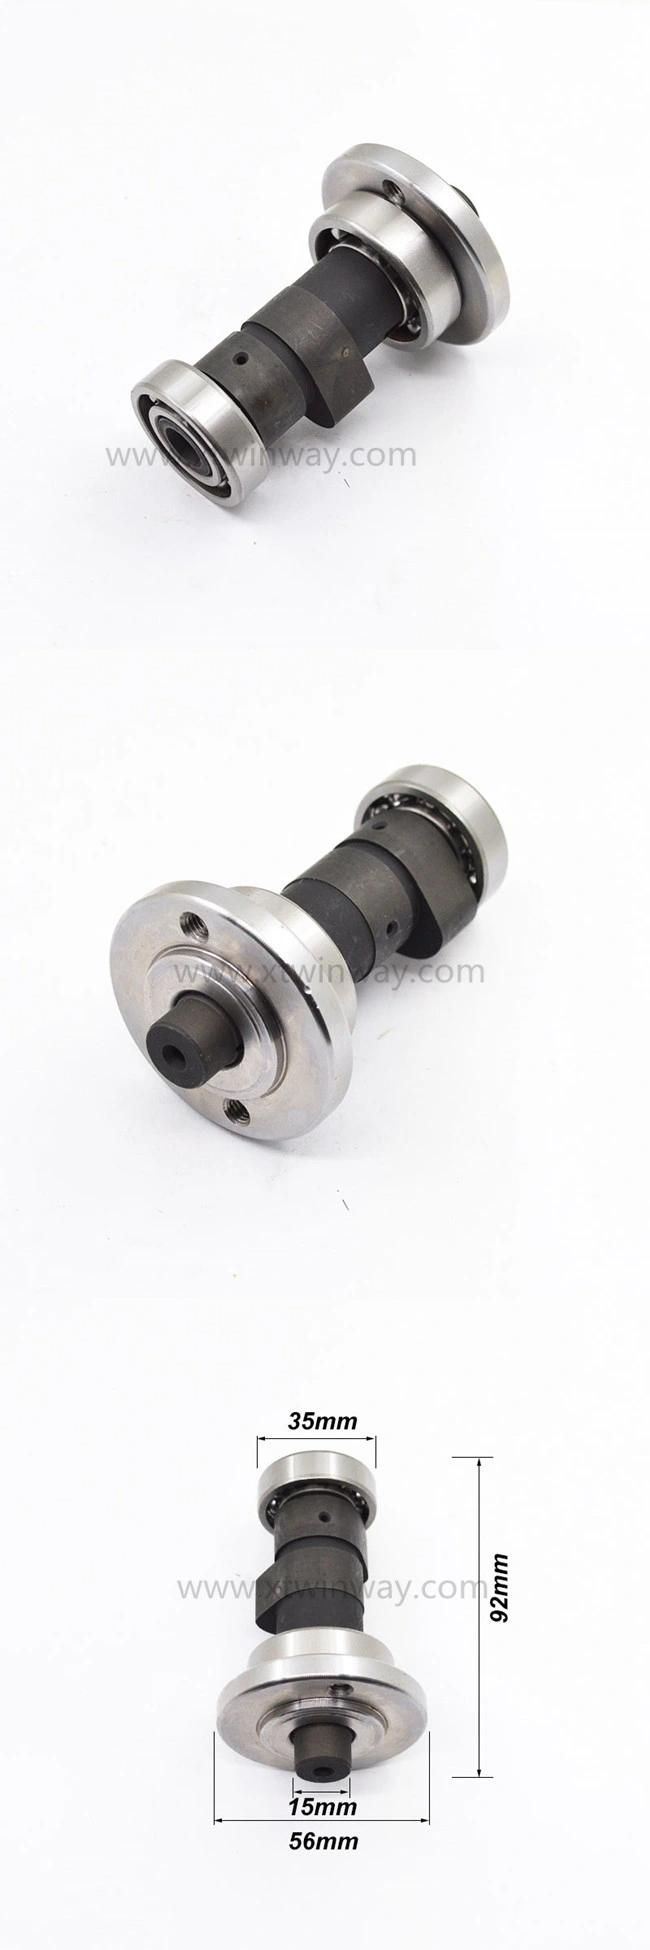 Ww-82119 Wy125 Motorcycle Camshaft Shaft Assy Motorcycle Parts